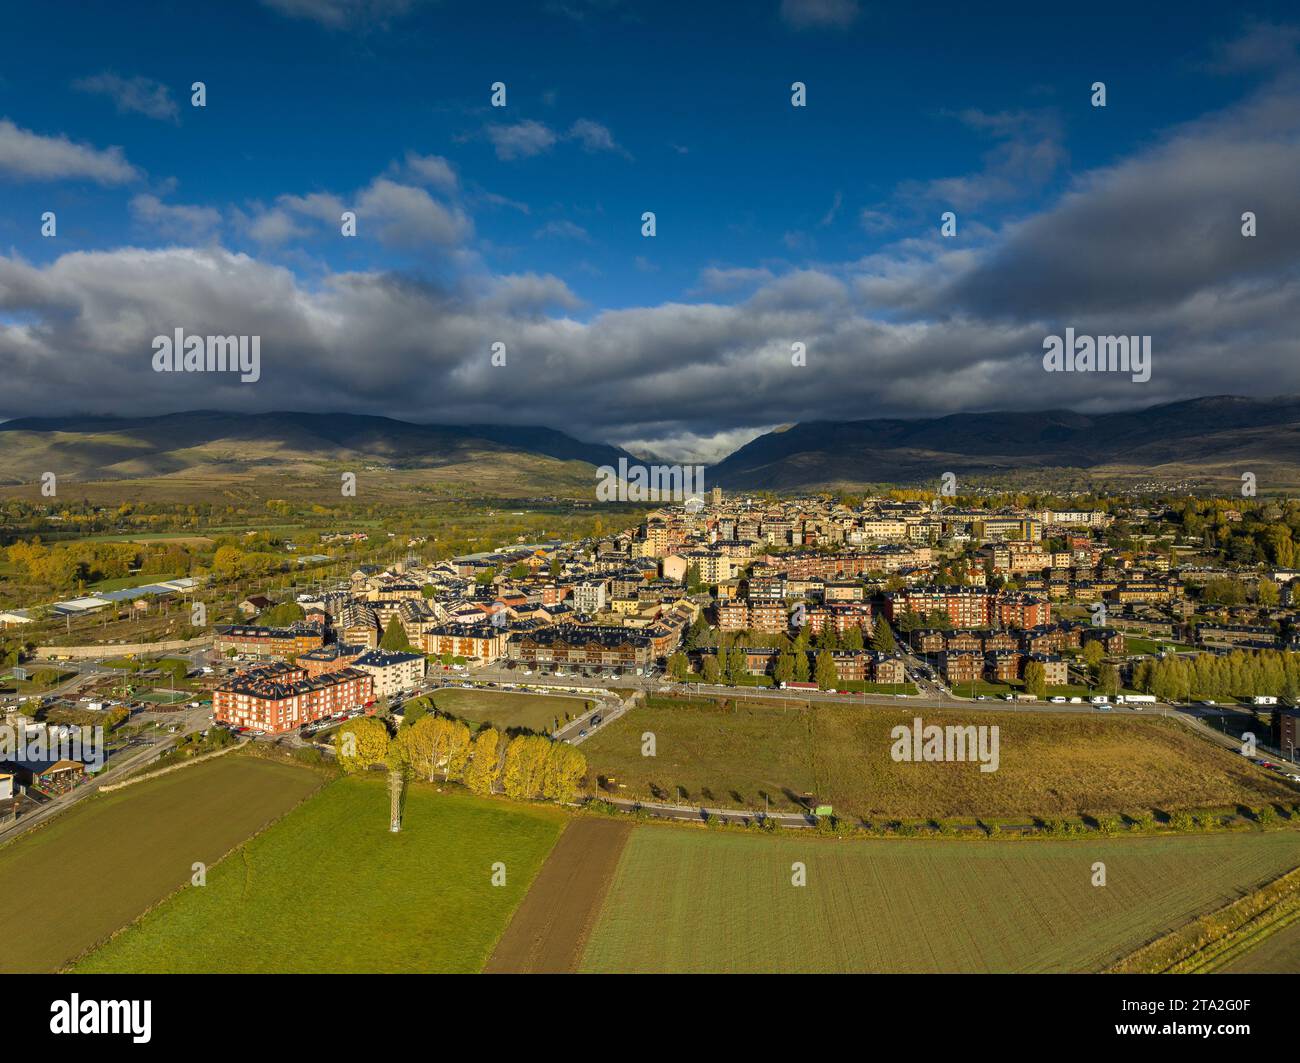 Aerial view of the city of Puigcerdà and its rural surroundings on an autumn morning (Cerdanya, Catalonia, Spain, Pyrenees) Stock Photo